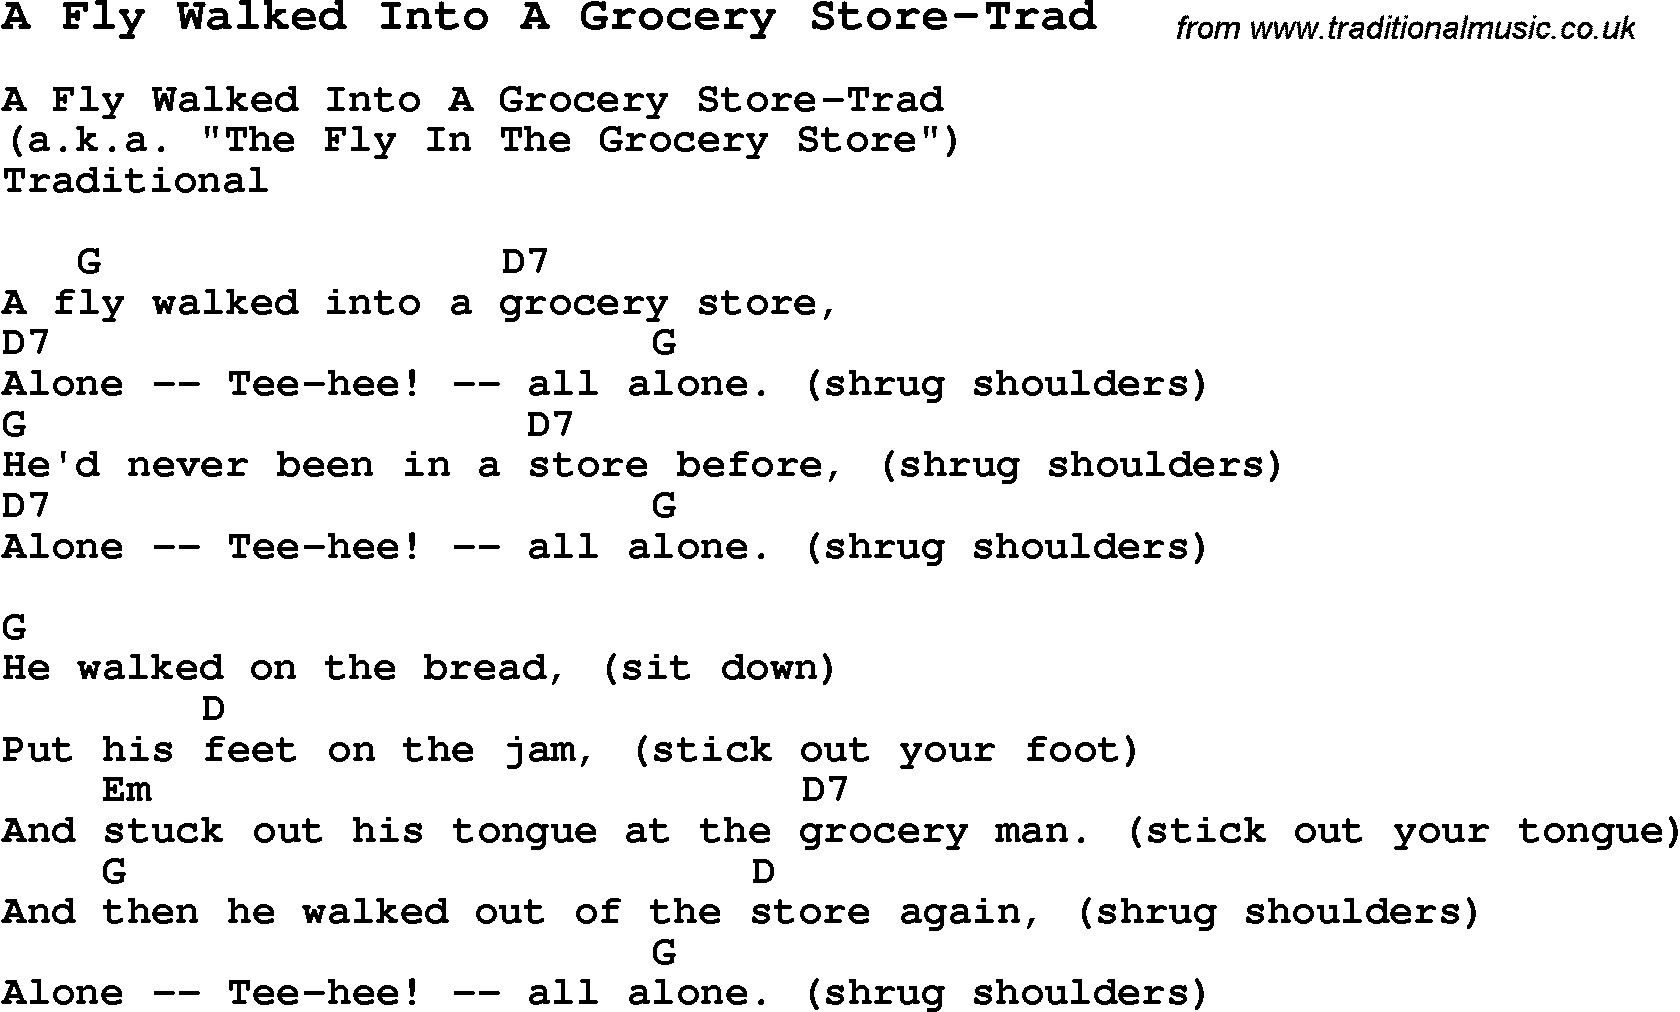 Summer-Camp Song, A Fly Walked Into A Grocery Store-Trad, with lyrics and chords for Ukulele, Guitar Banjo etc.